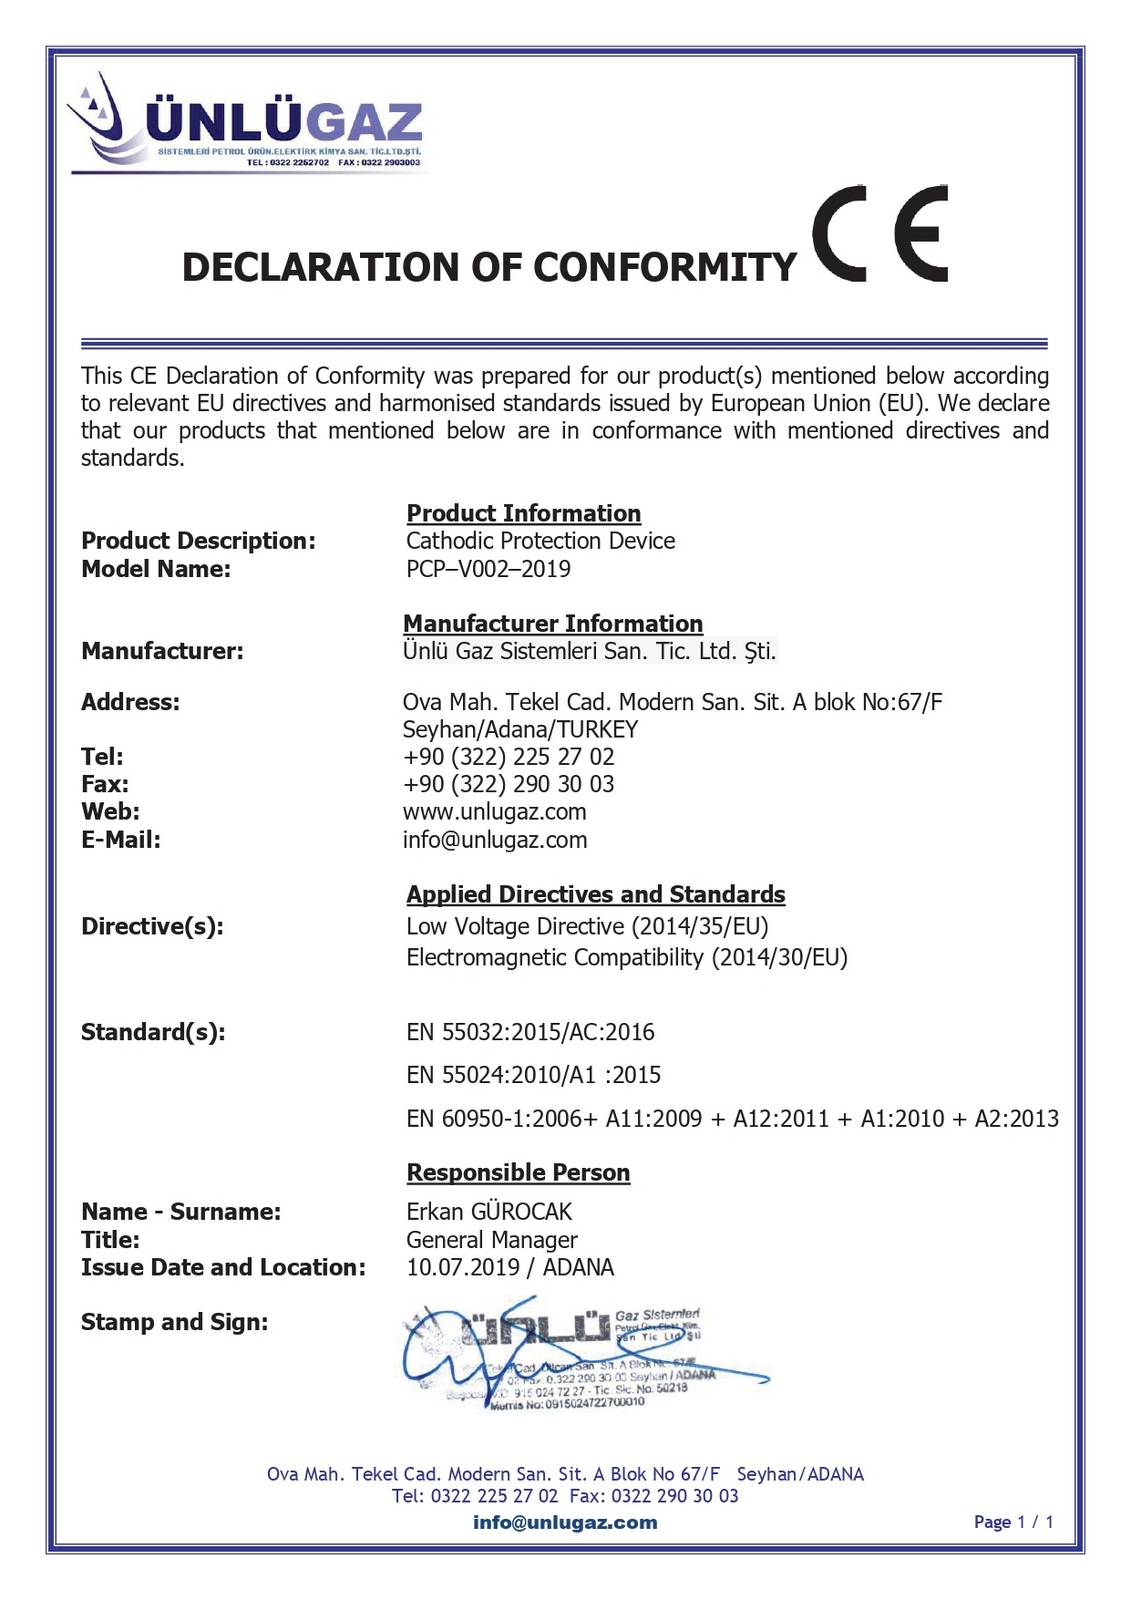 PCPtech CE Declaration of Conformity (Eng)